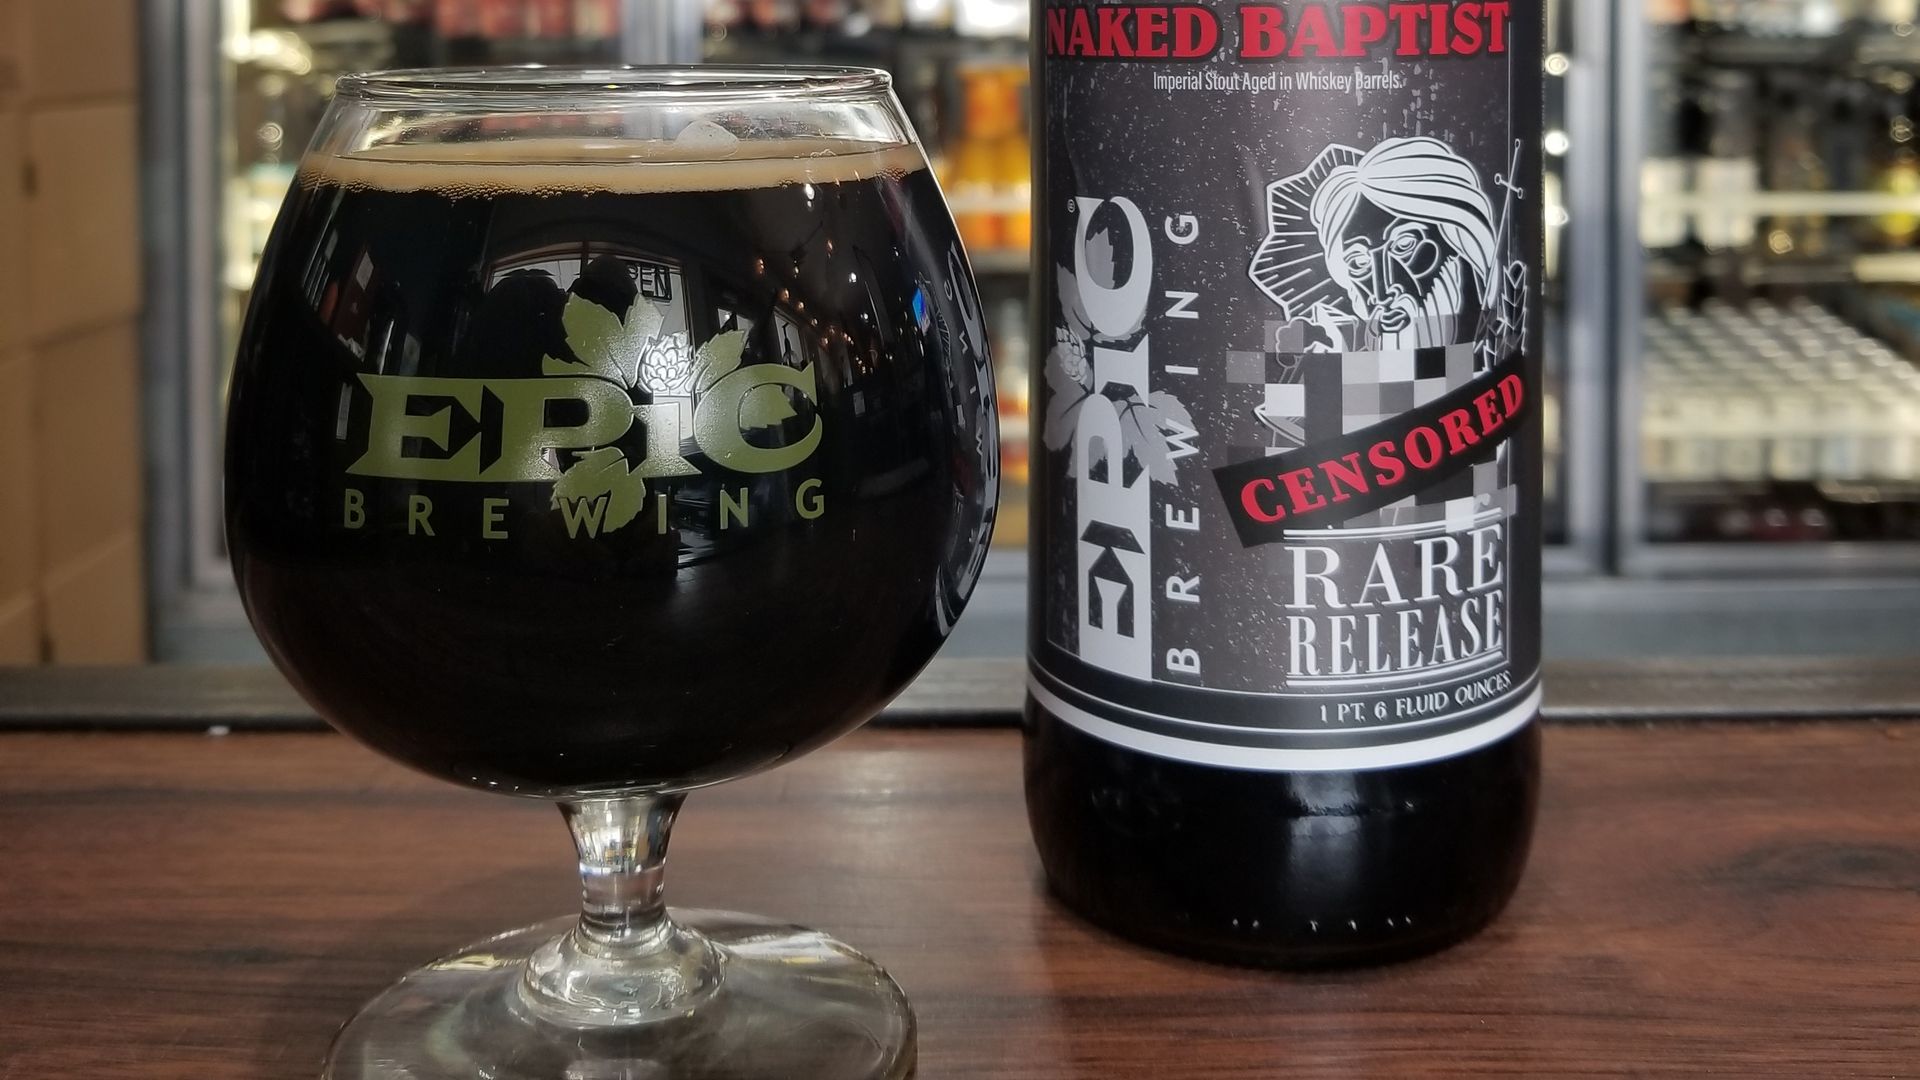 Epic Brewing's Naked Baptist. Photo courtesy of Epic Brewing